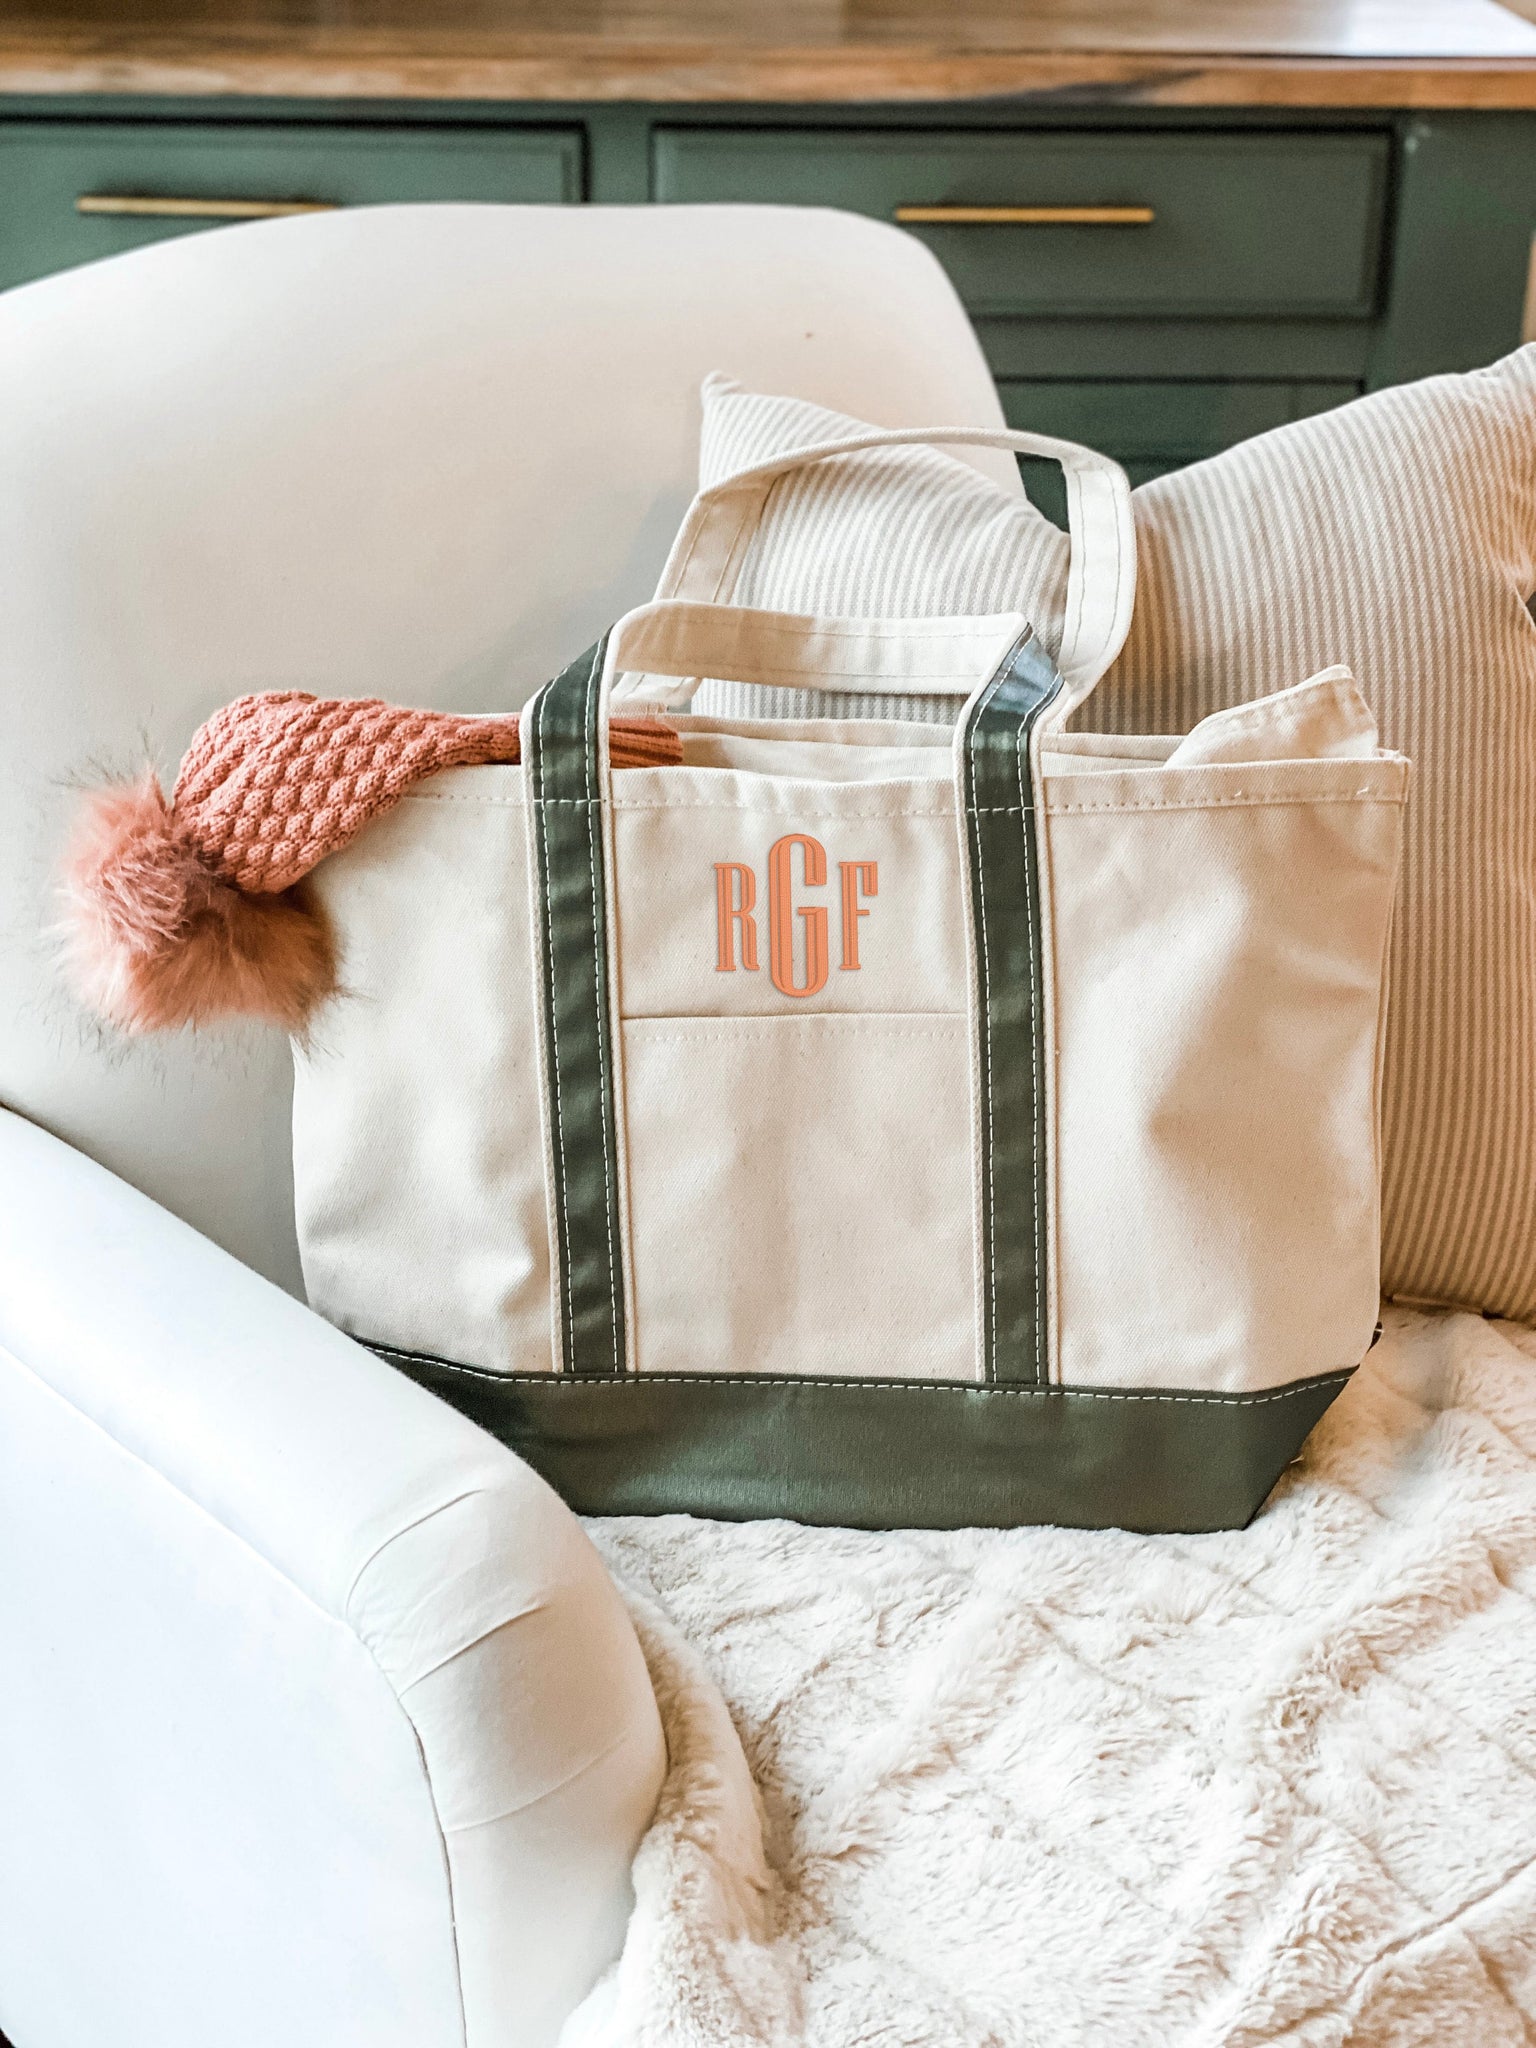 boat and tote monogram